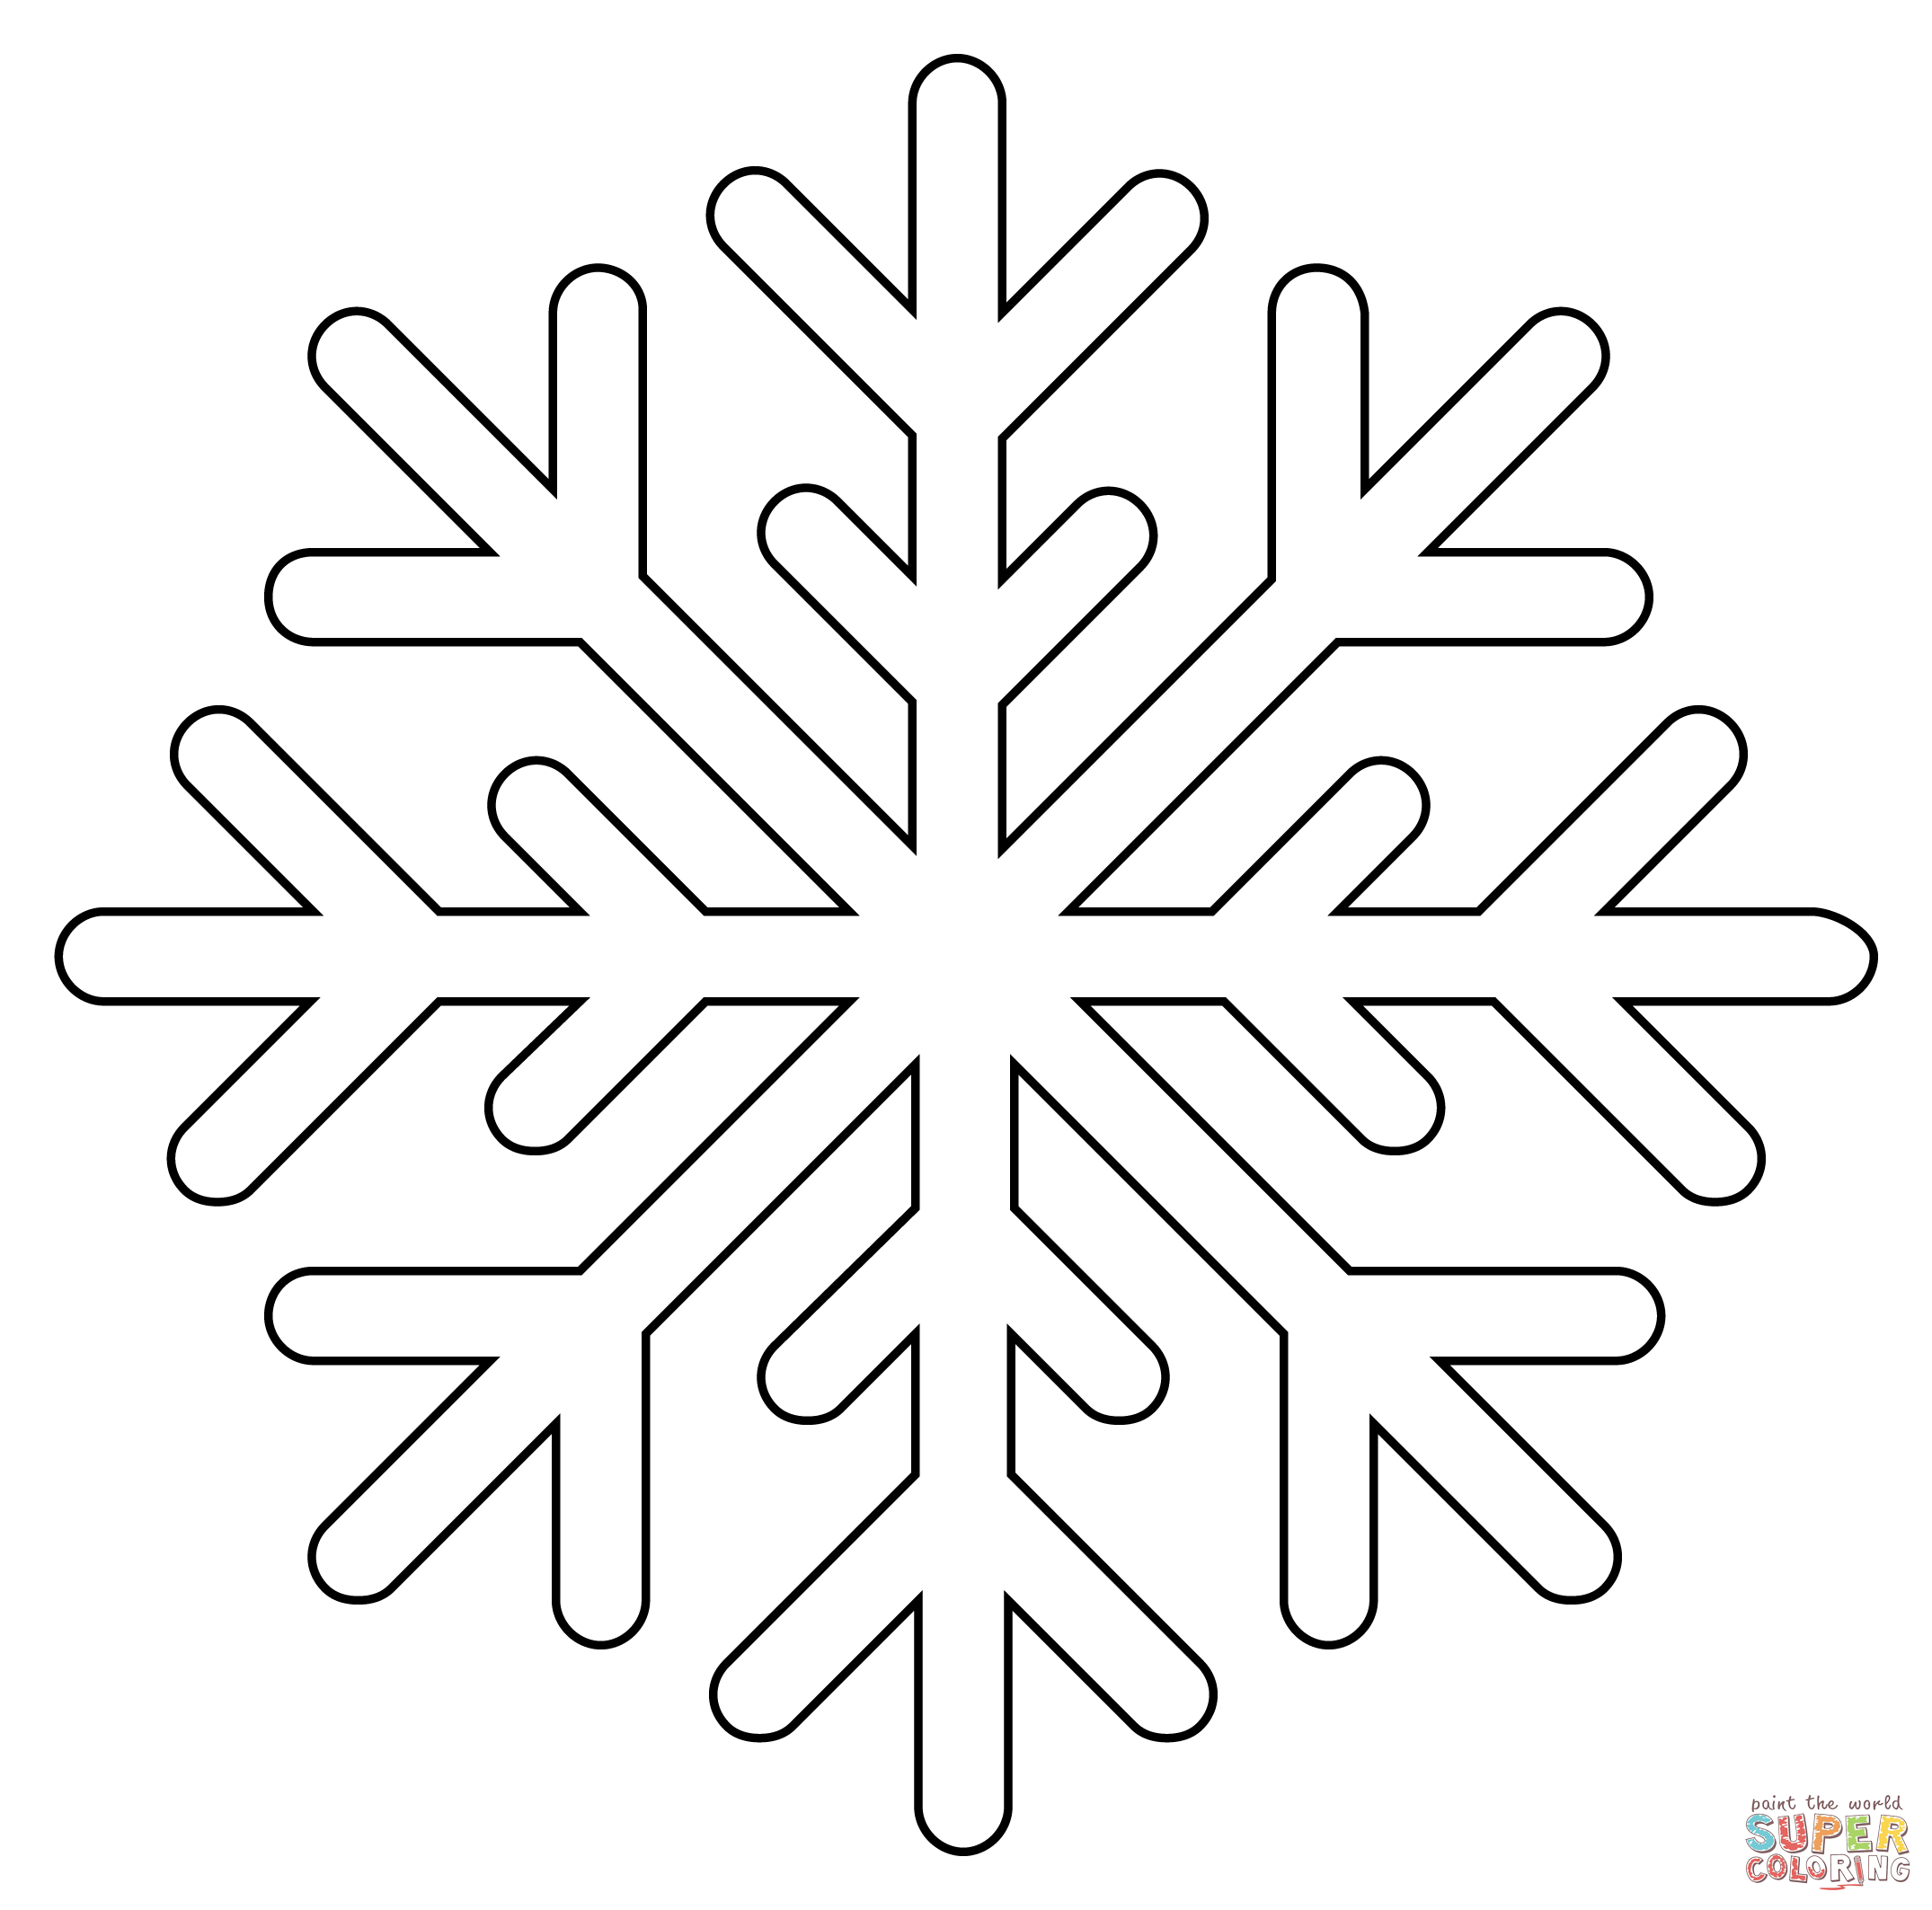 Snowflake coloring page free printable coloring pages